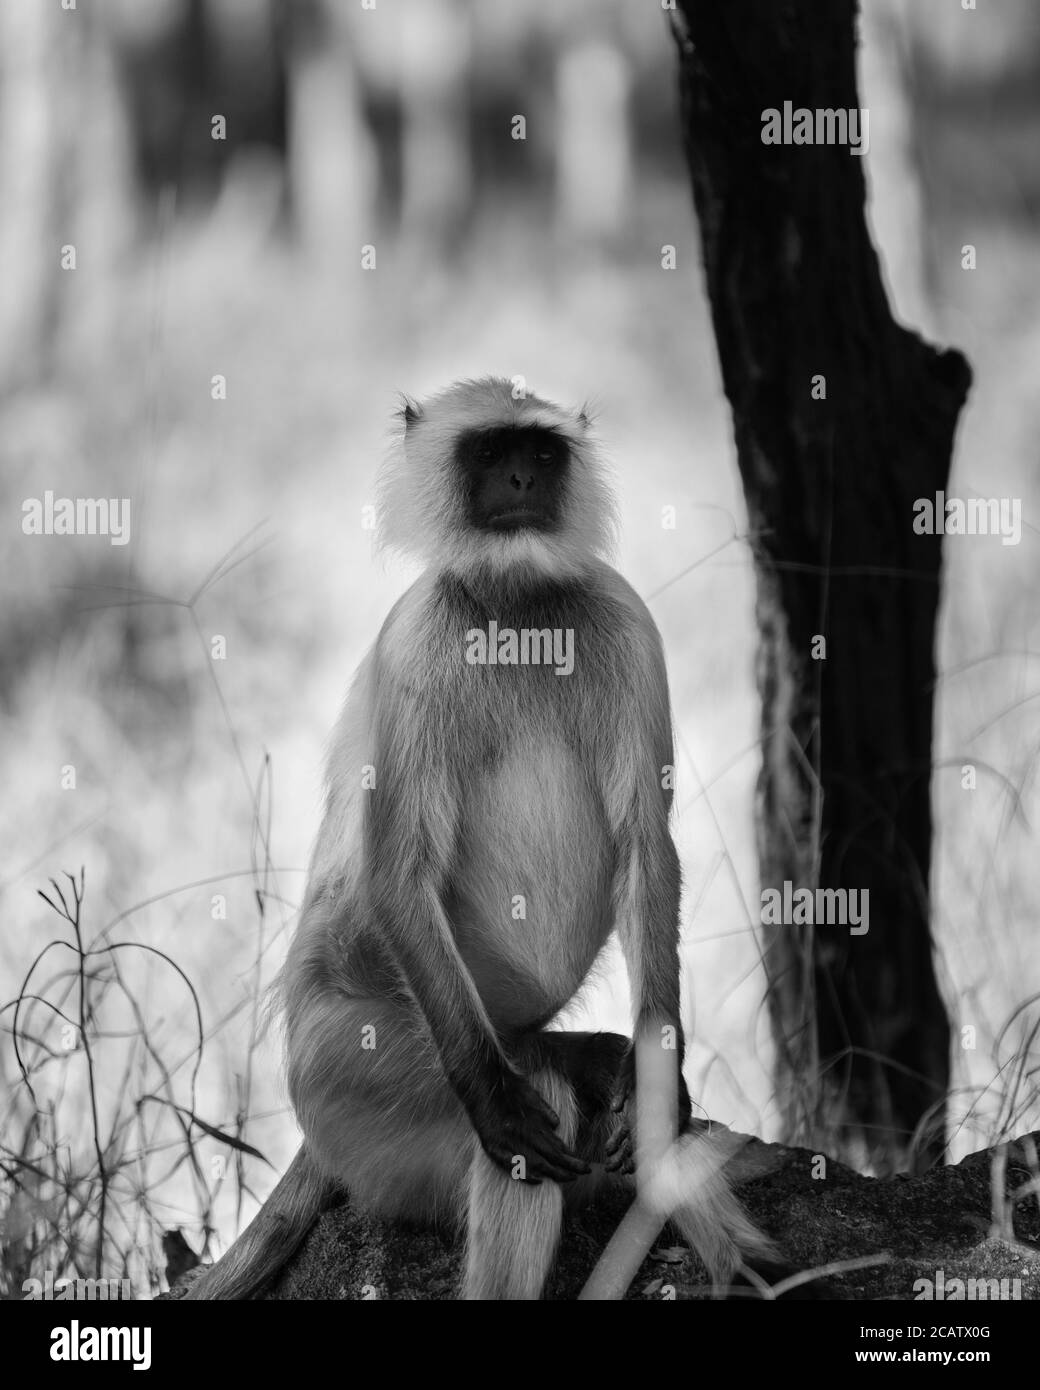 Monkey sitting and posing with eye contact in forest. Black and White photograph Stock Photo